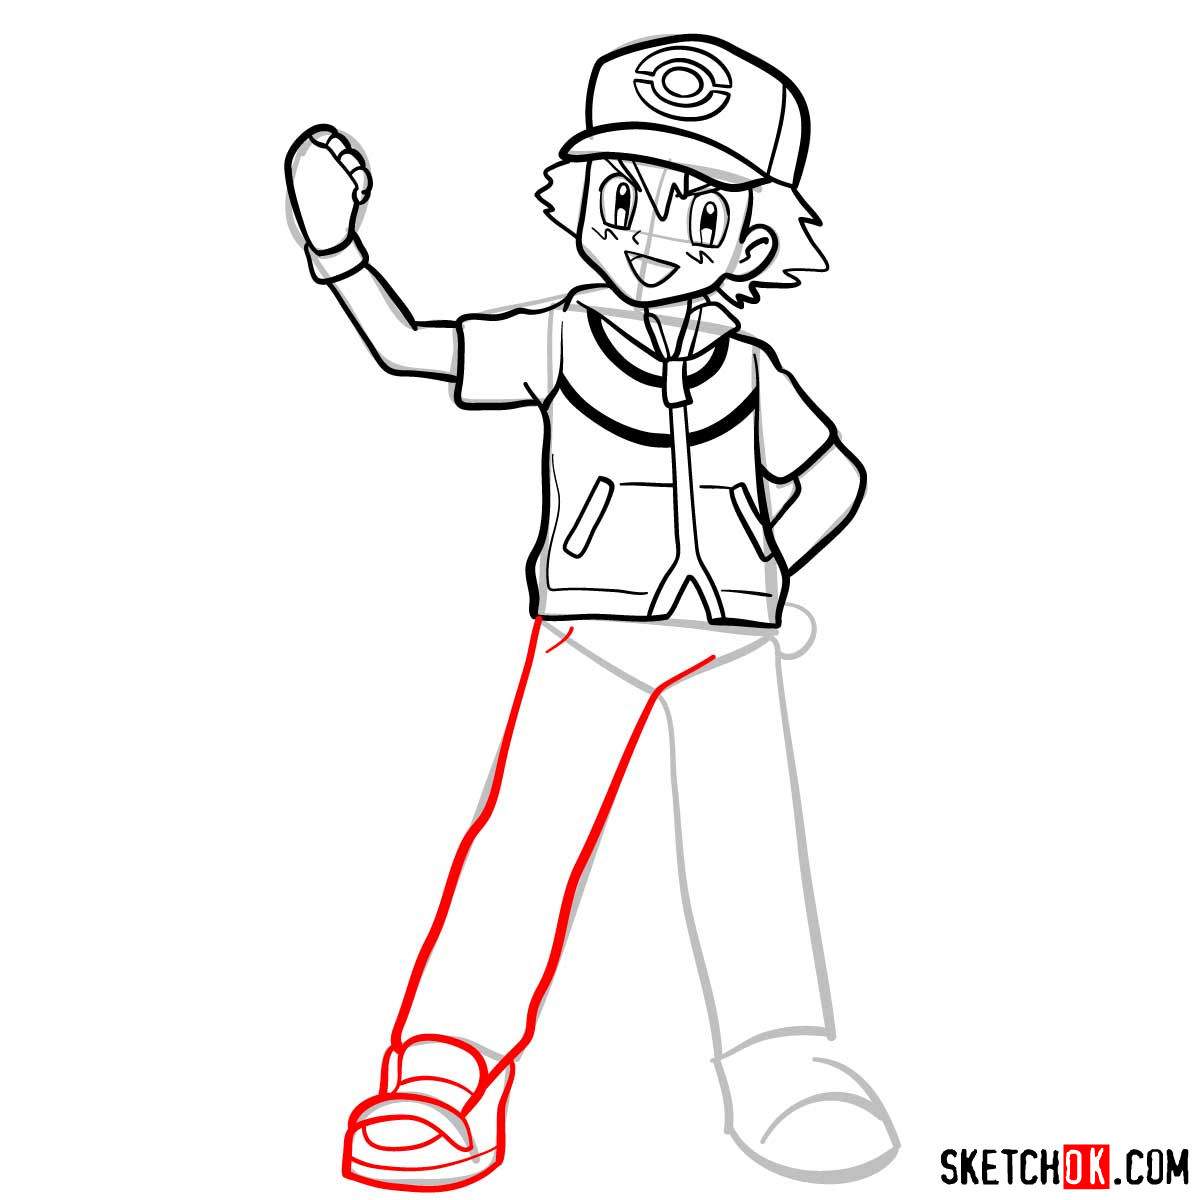 How to draw Ash from Pokemon anime - step 12